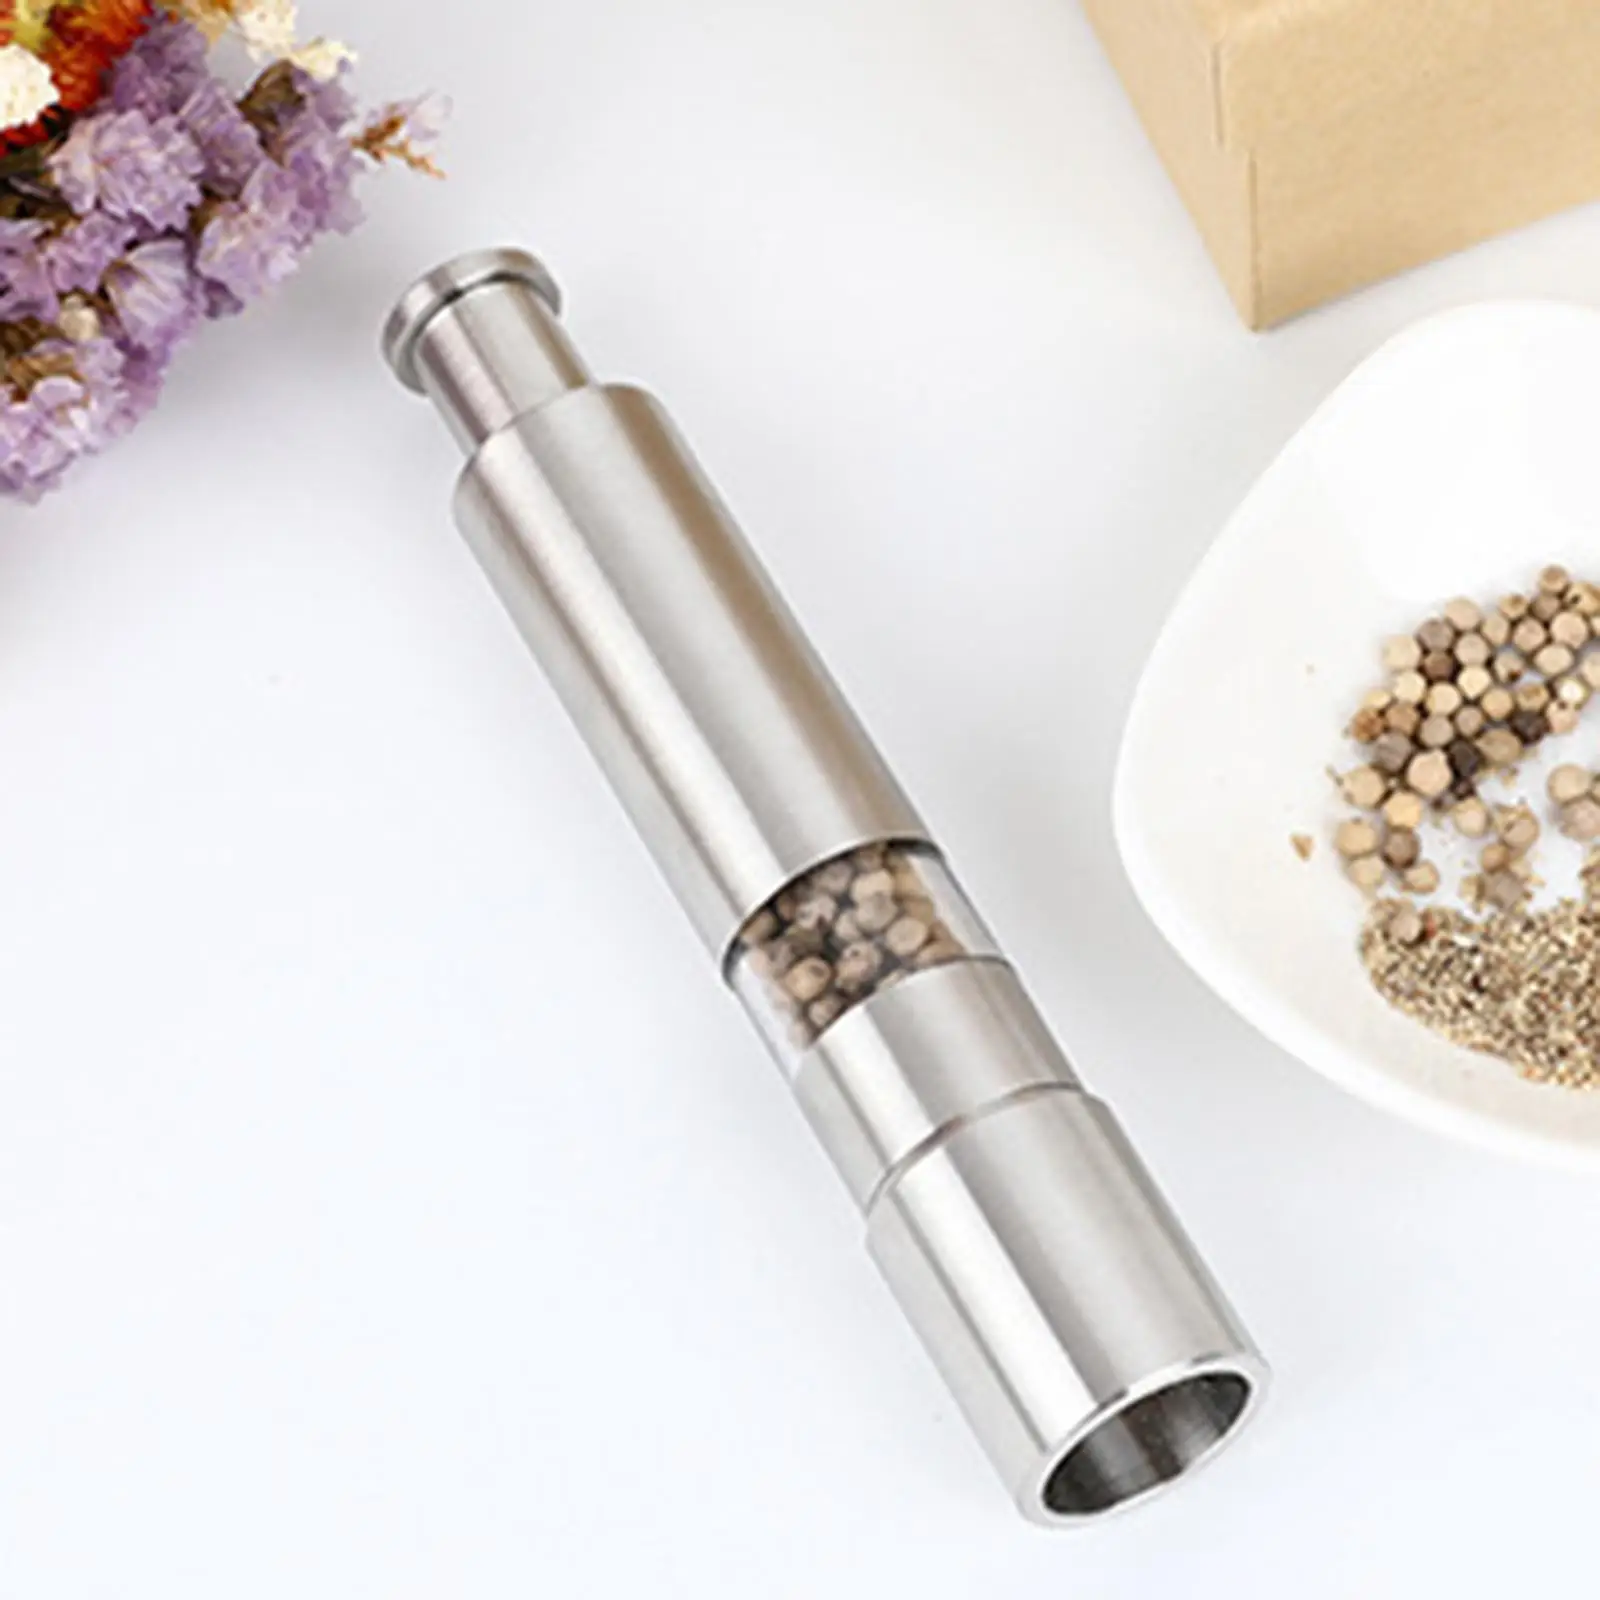 Salt or , Stainless Steel Professional Sauce Mill, for Household